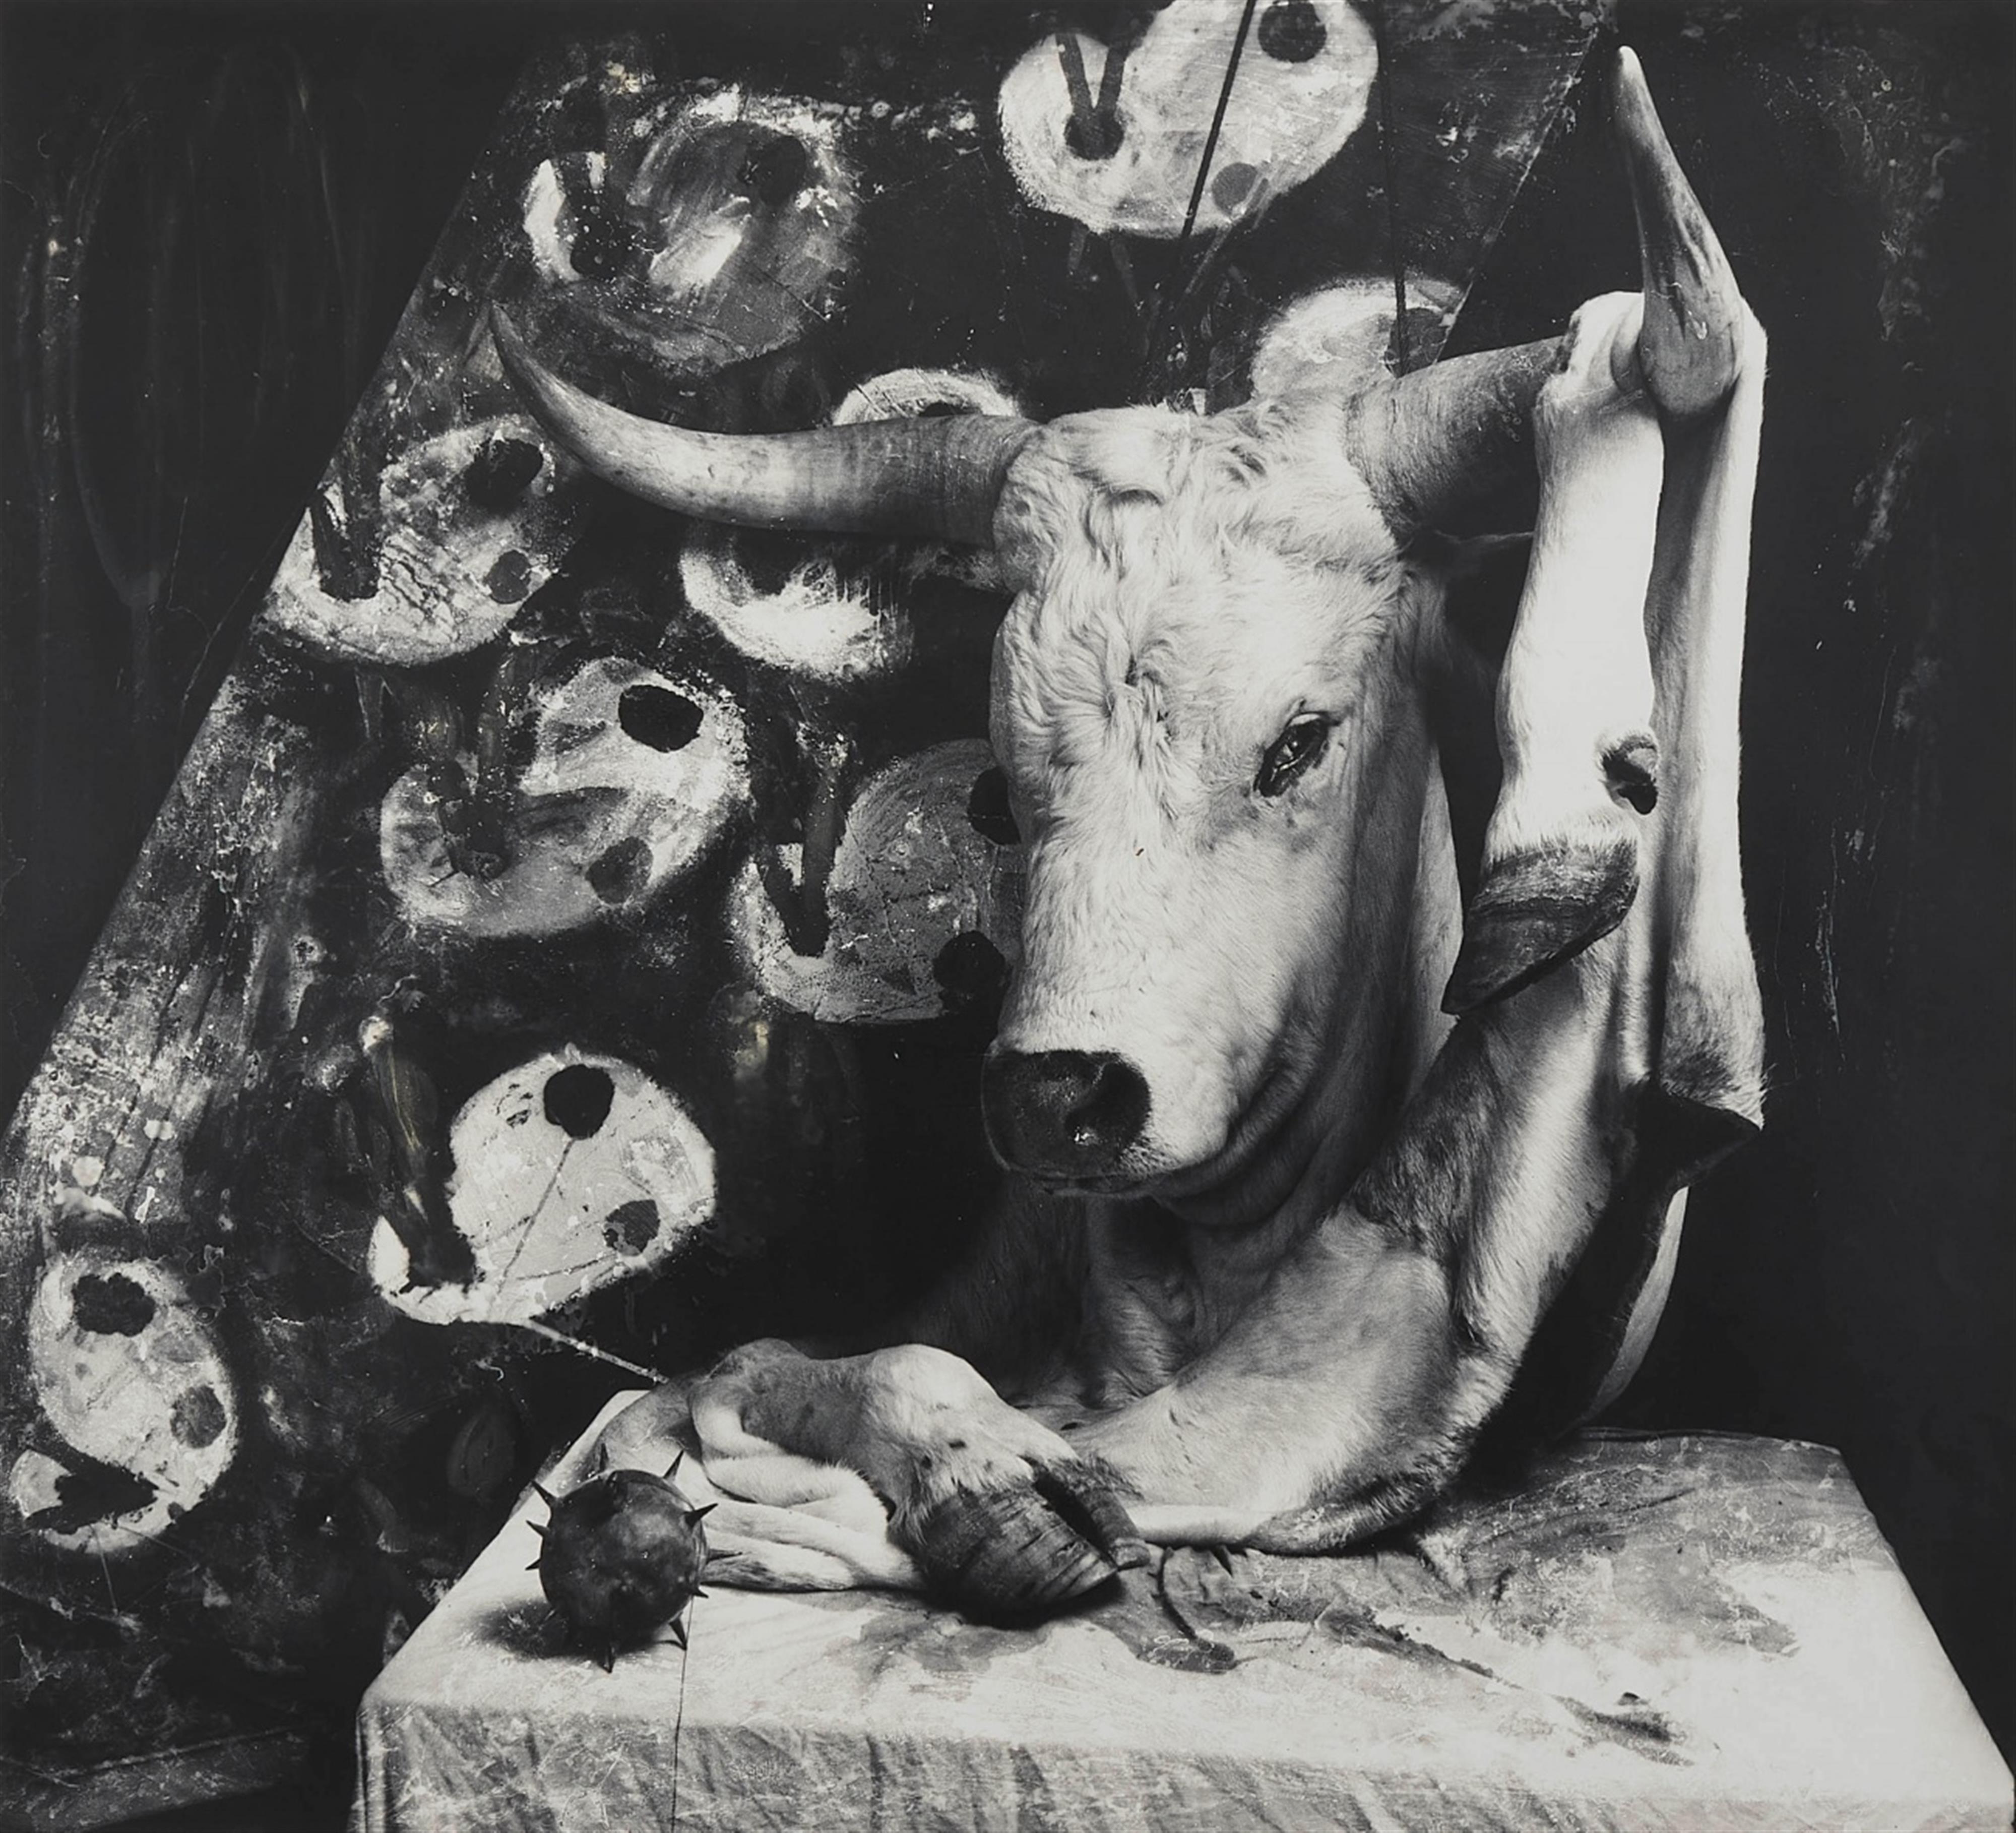 Joel-Peter Witkin - Vanity, New Mexico - image-1